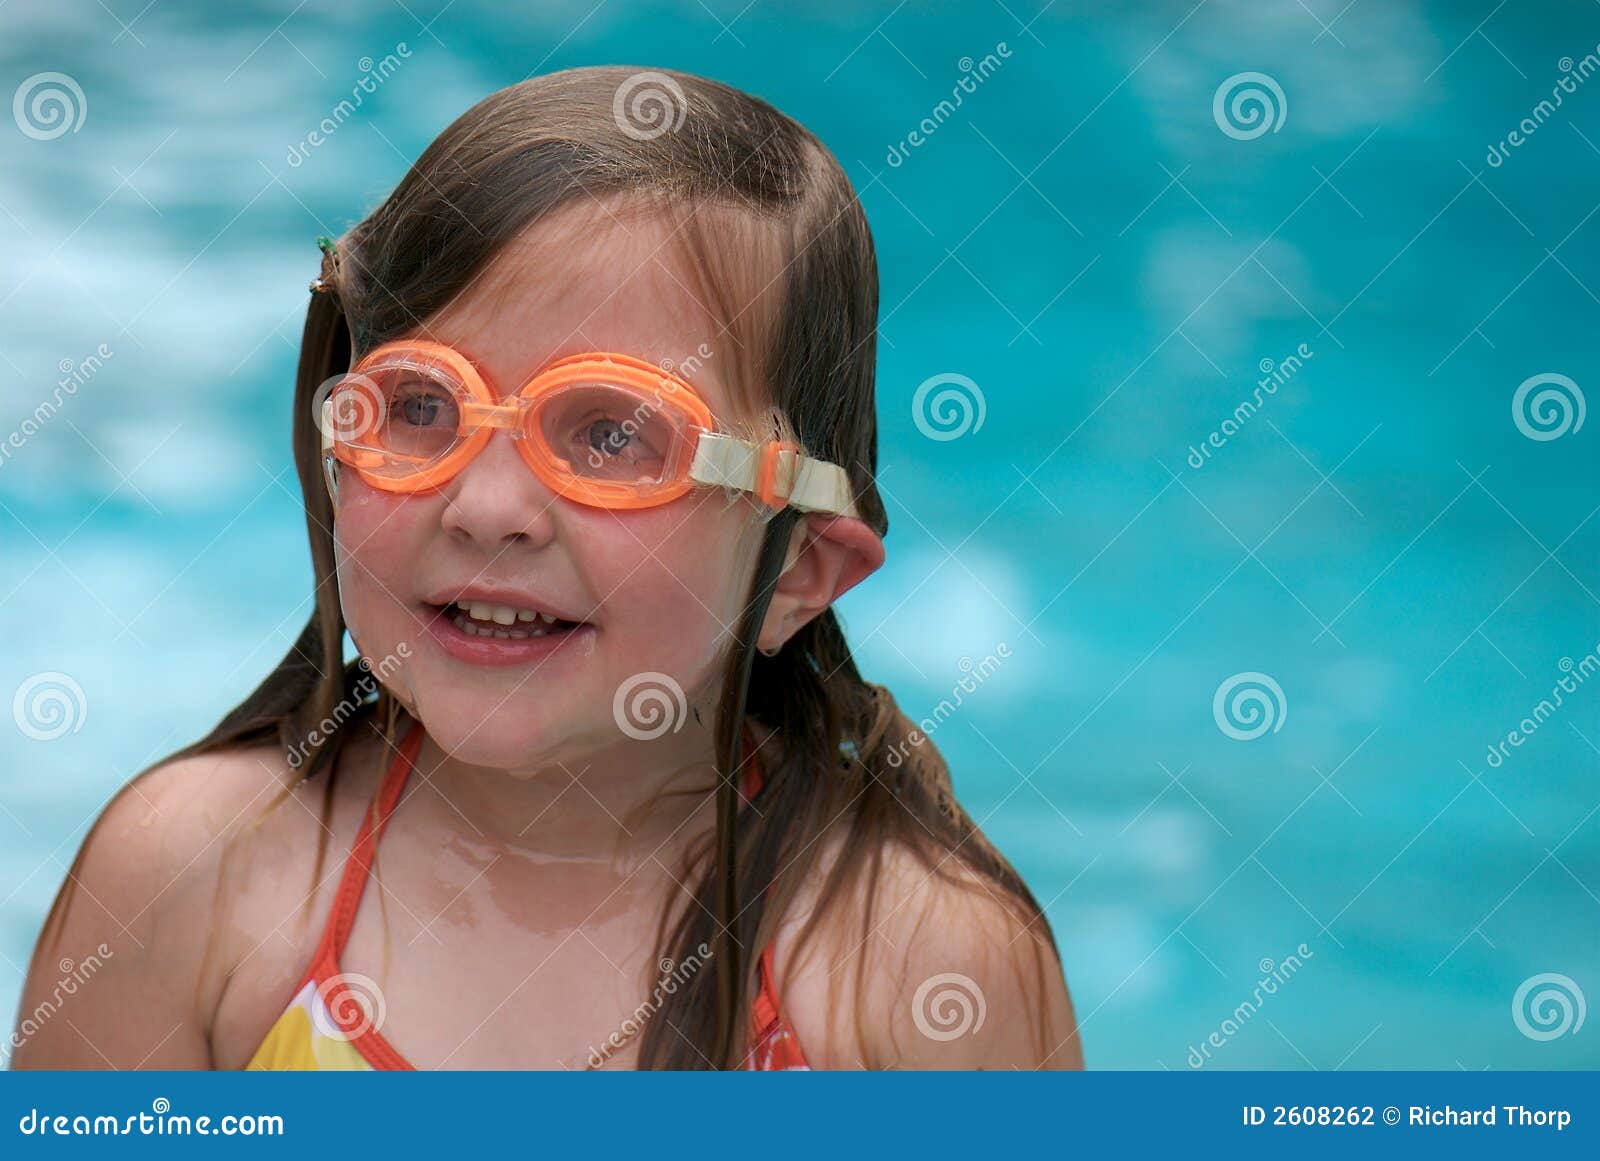 Girl swimming with goggles stock photo. Image of girl - 2608262